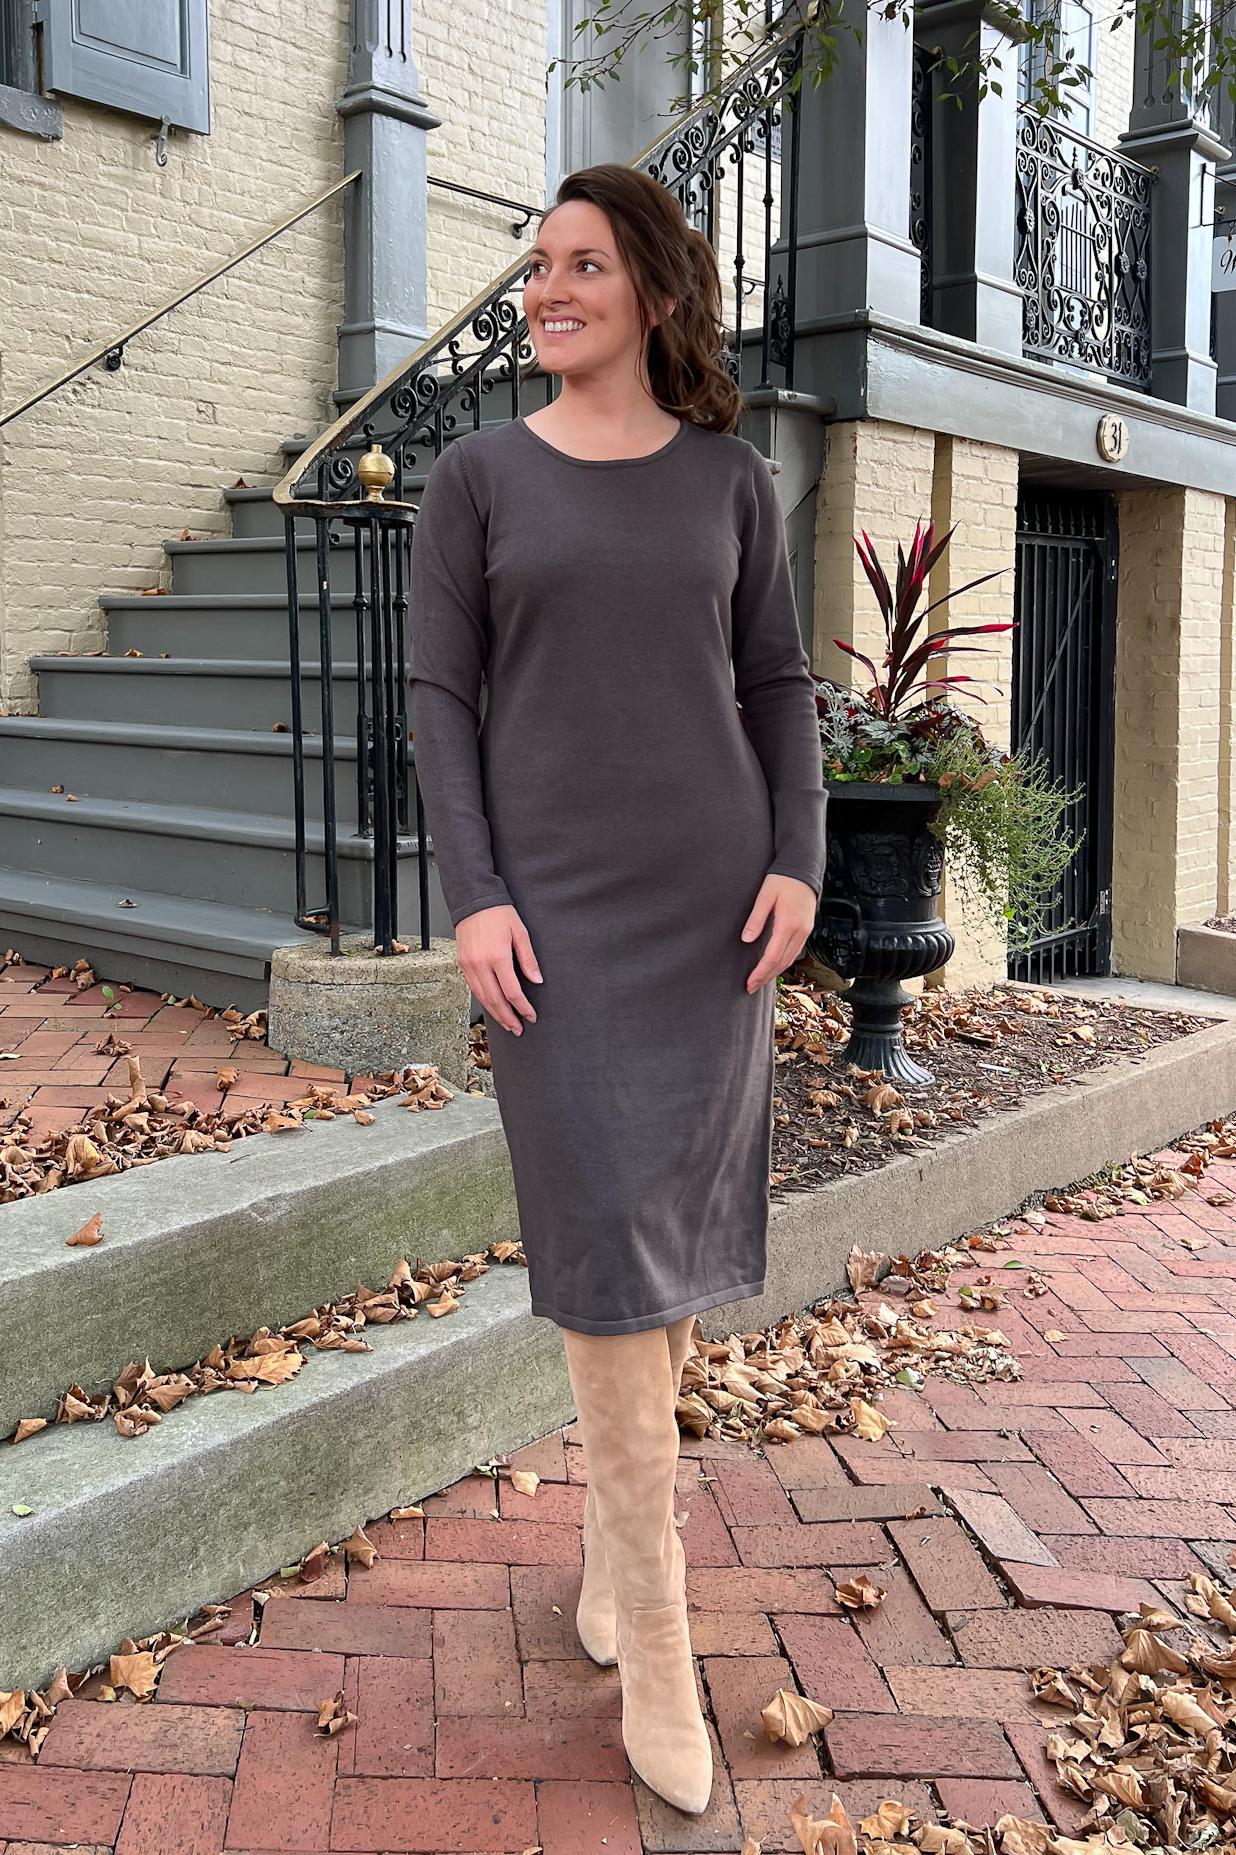 THE QUINN EVERYDAY SCOOP NECK SWEATER DRESS IN GREY (FINAL SALE)